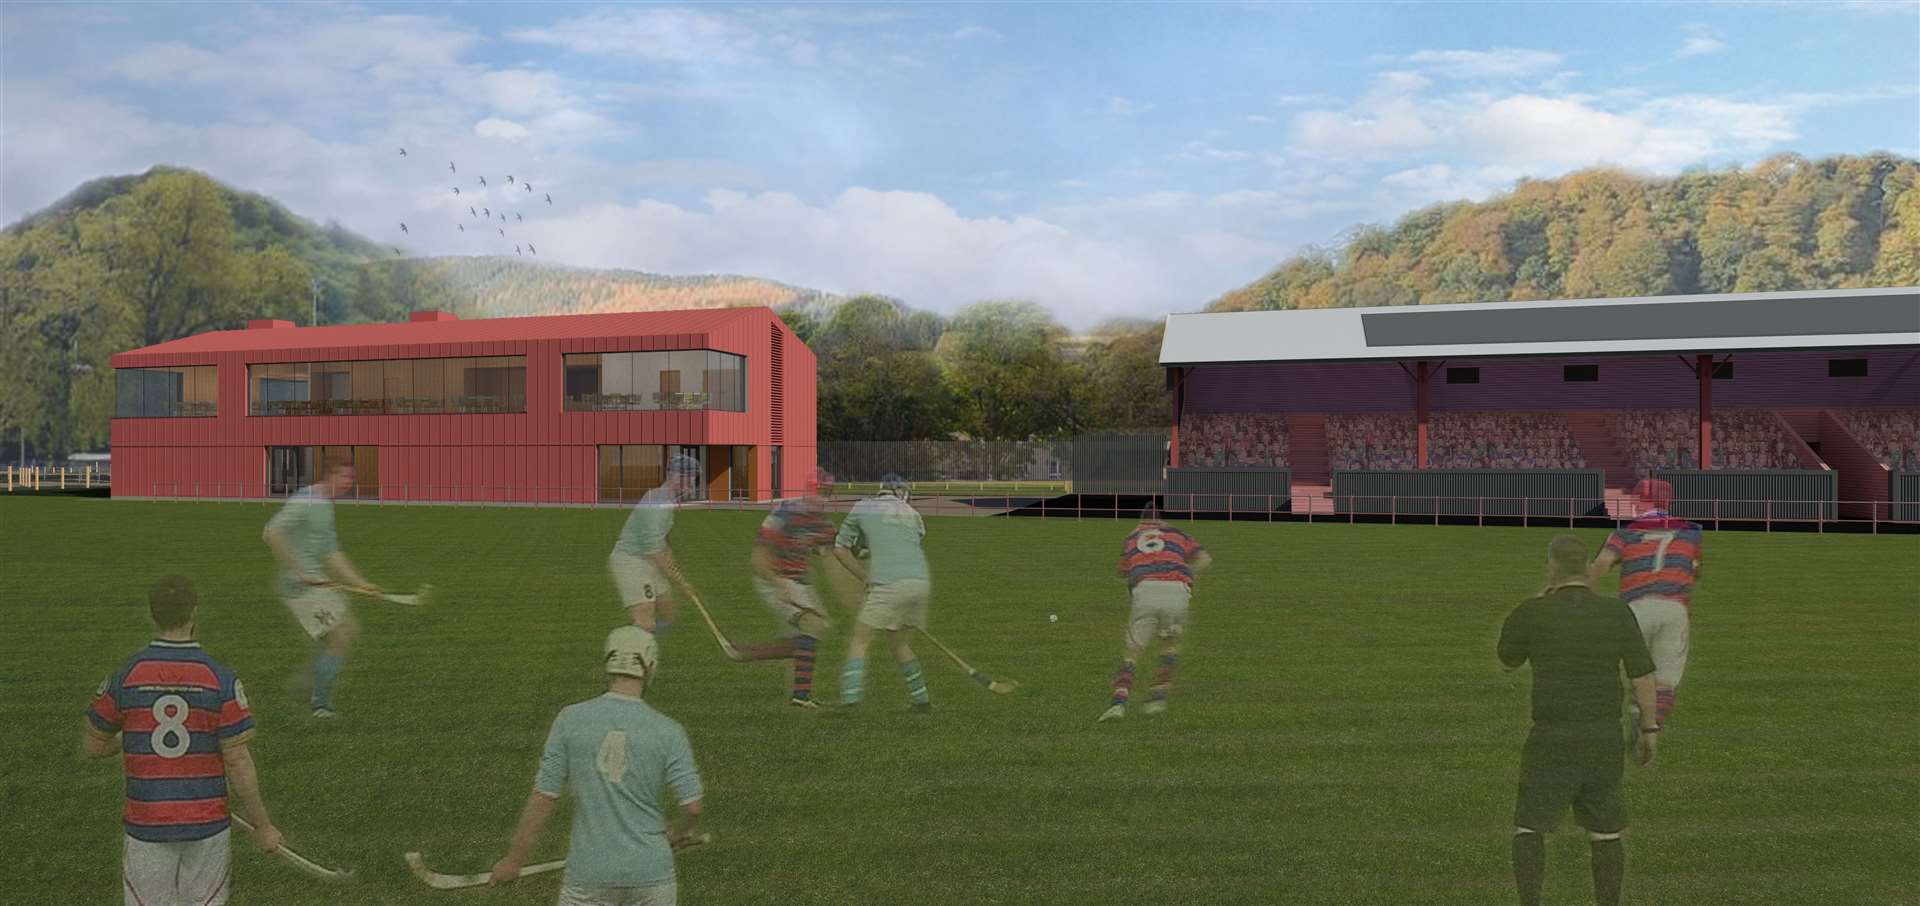 Artist Impression only (colour of pavilion cladding to be decided), view from shinty pitch to grandstand and new sports pavilion. Picture: The Highland Council Design consultancy.